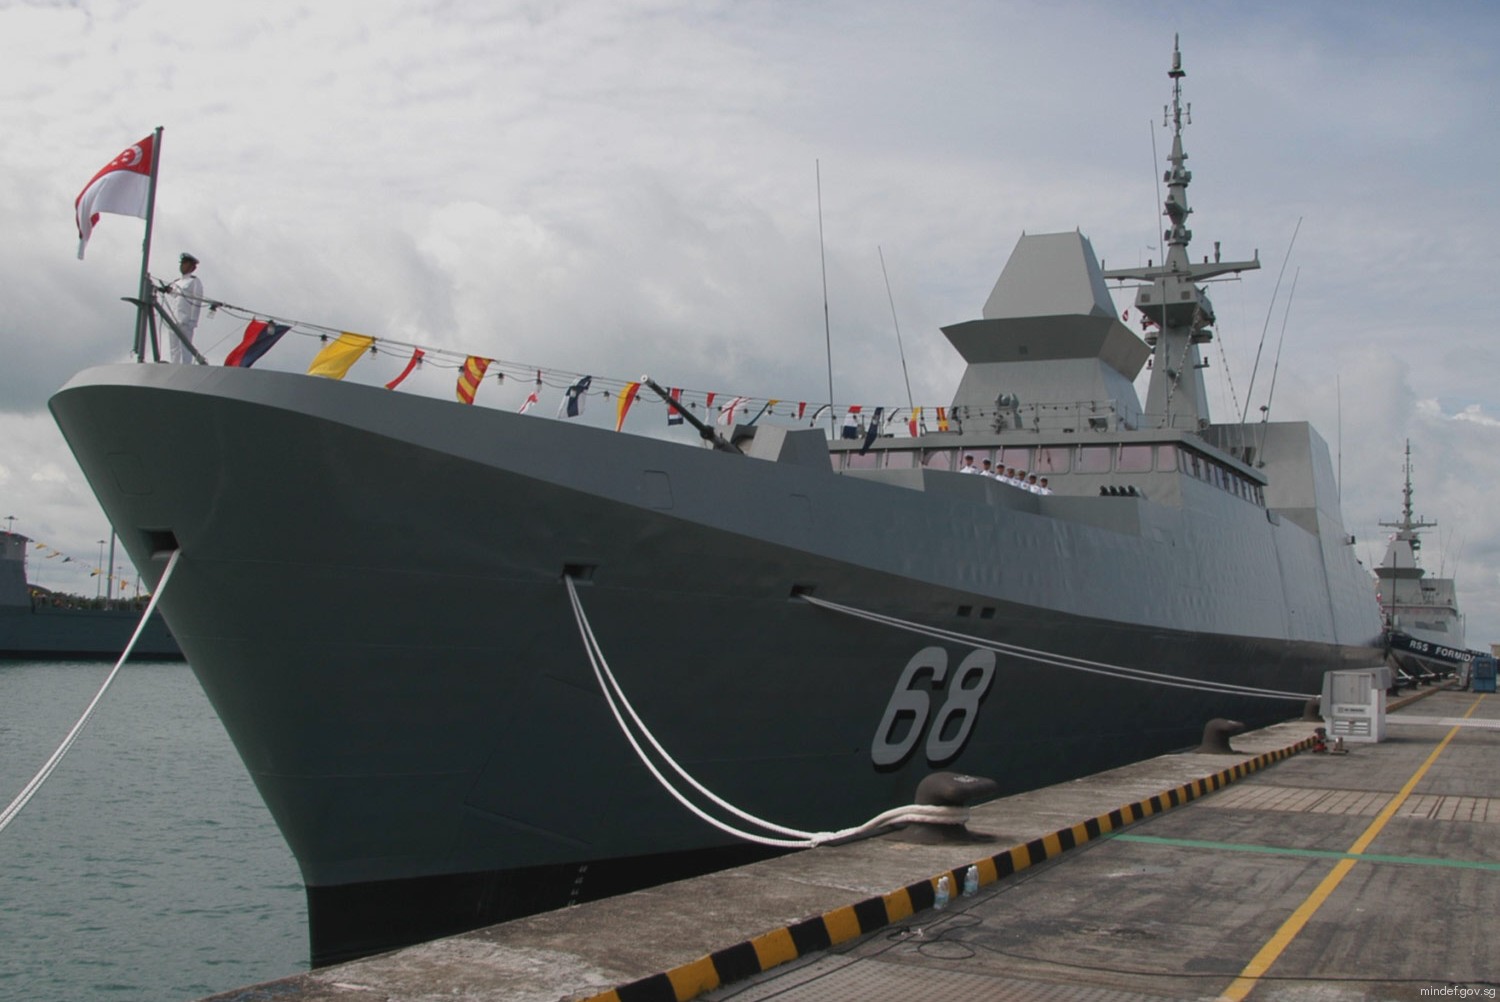 68 rss formidable class missile frigate republic of singapore navy 10